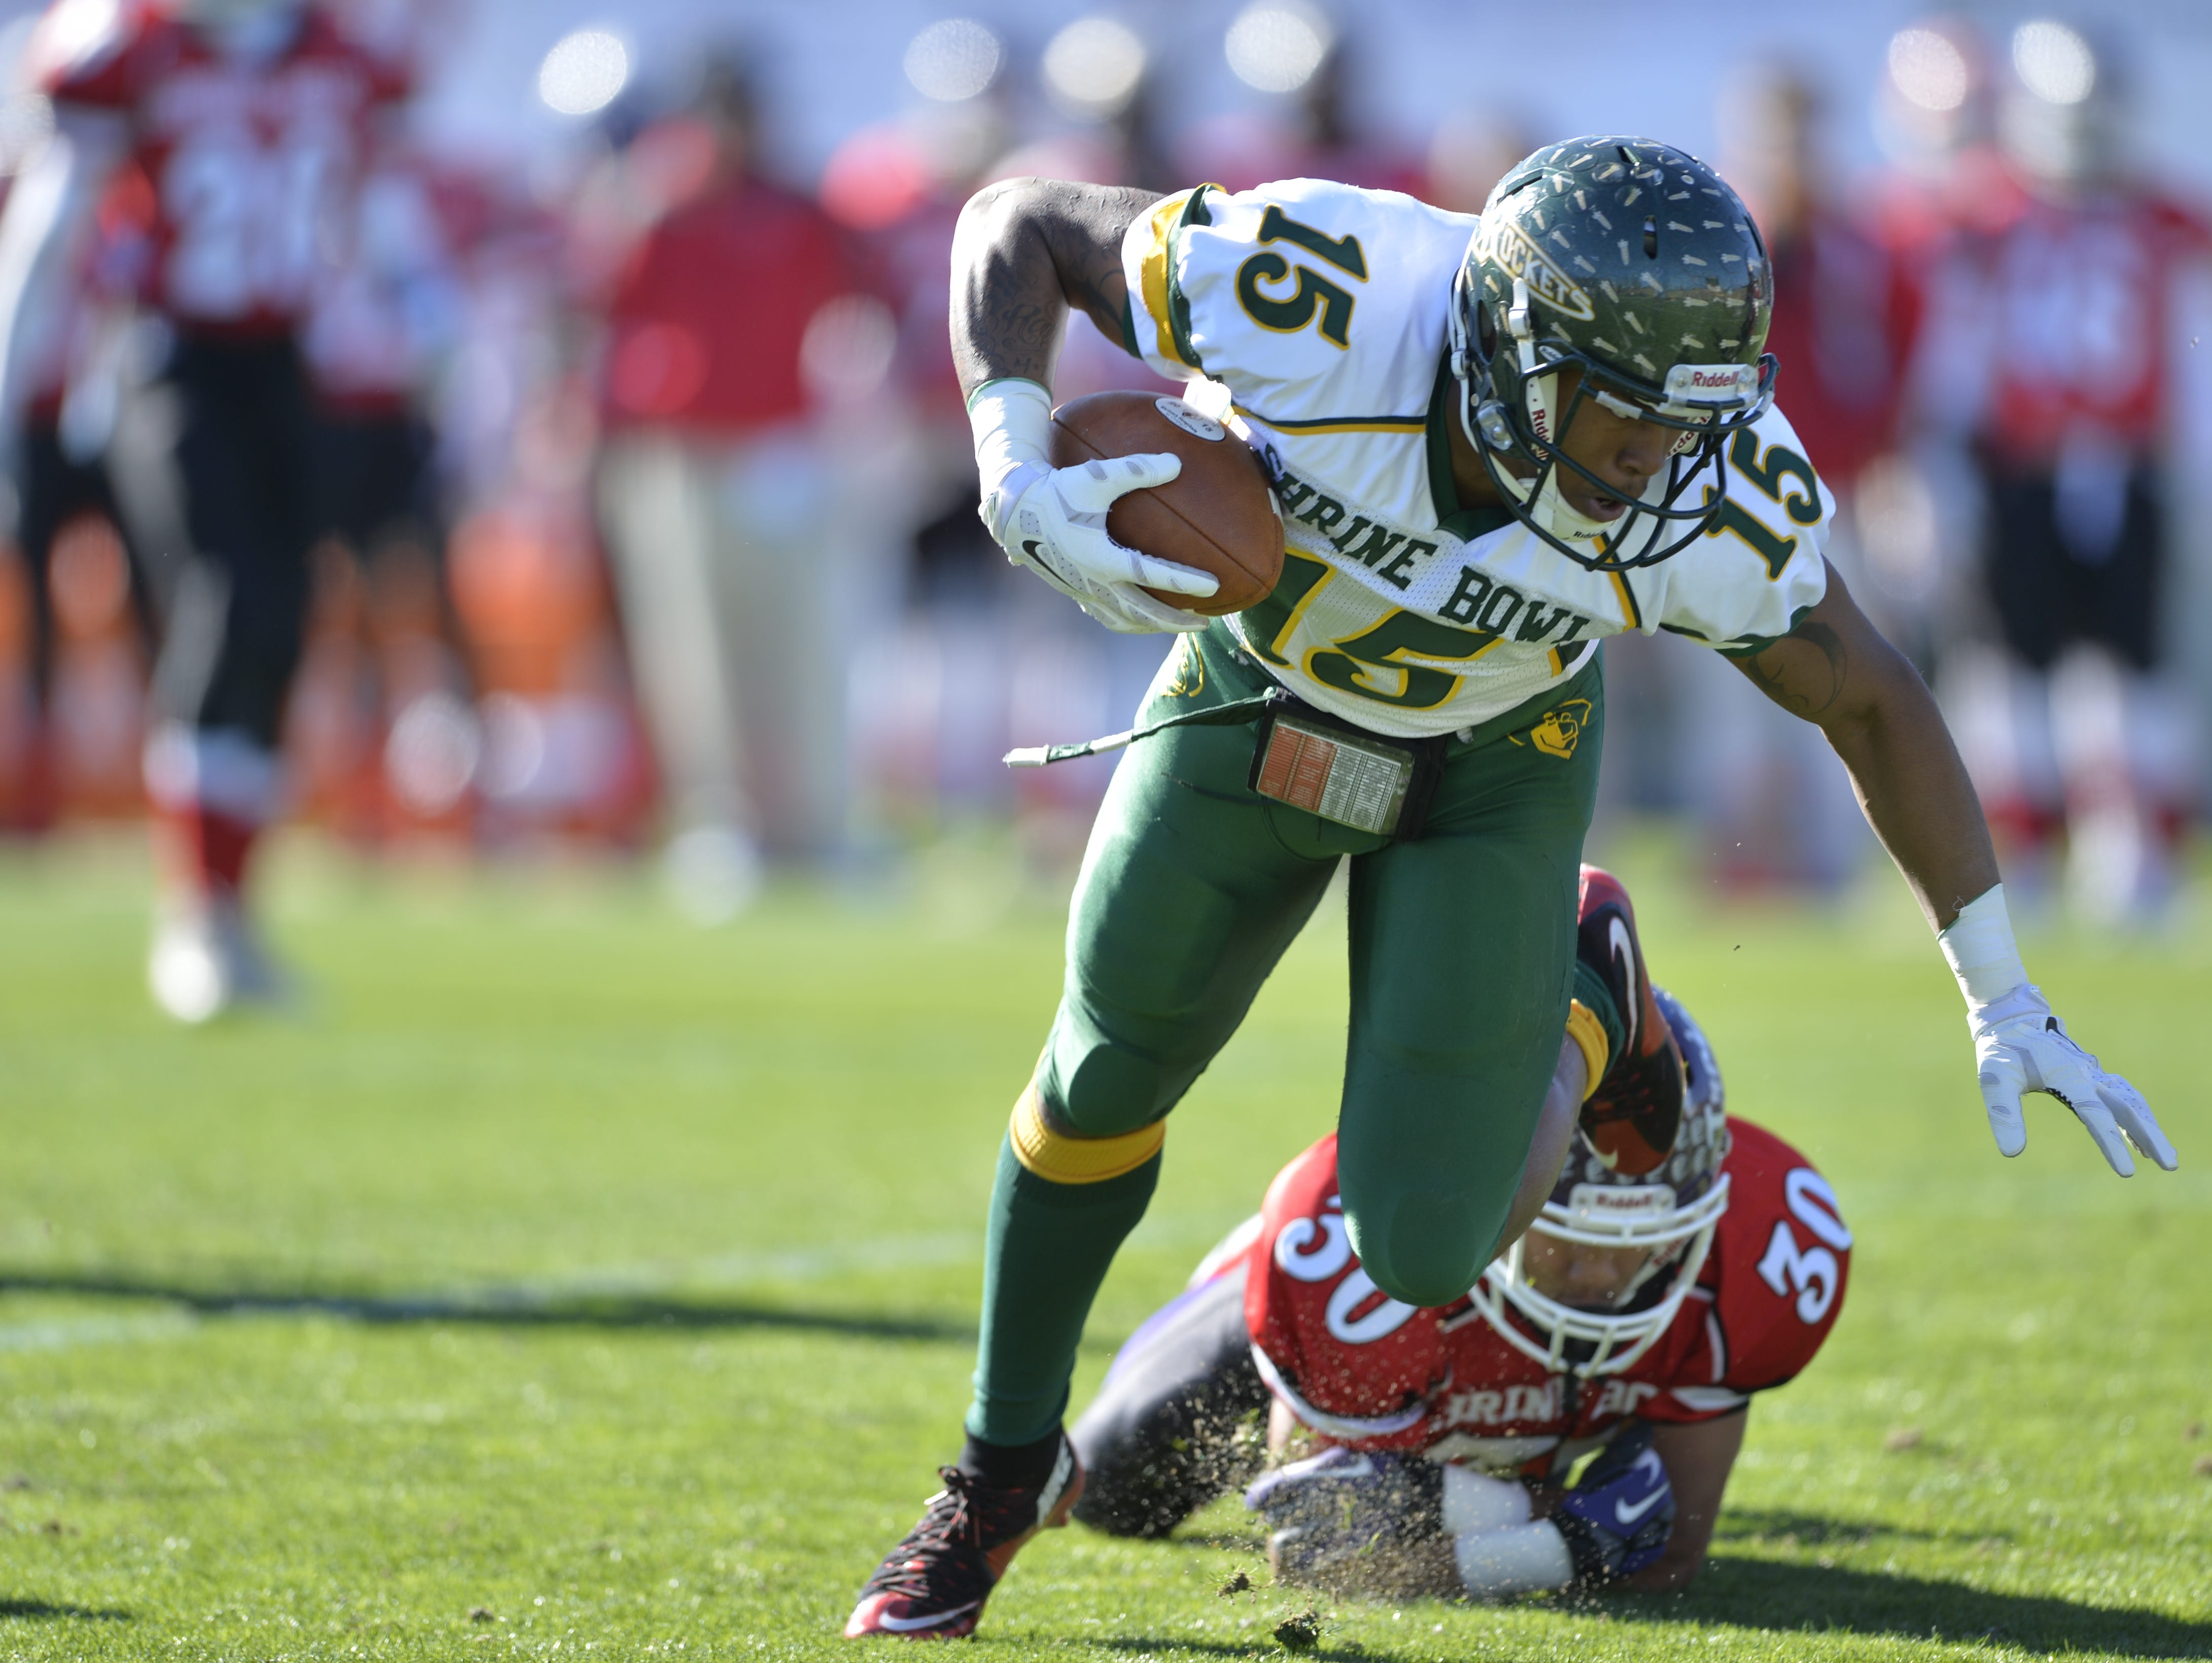 Reynolds' Rico Dowdle (15) scored two touchdowns in Saturday's Shrine Bowl in Spartanburg, S.C.